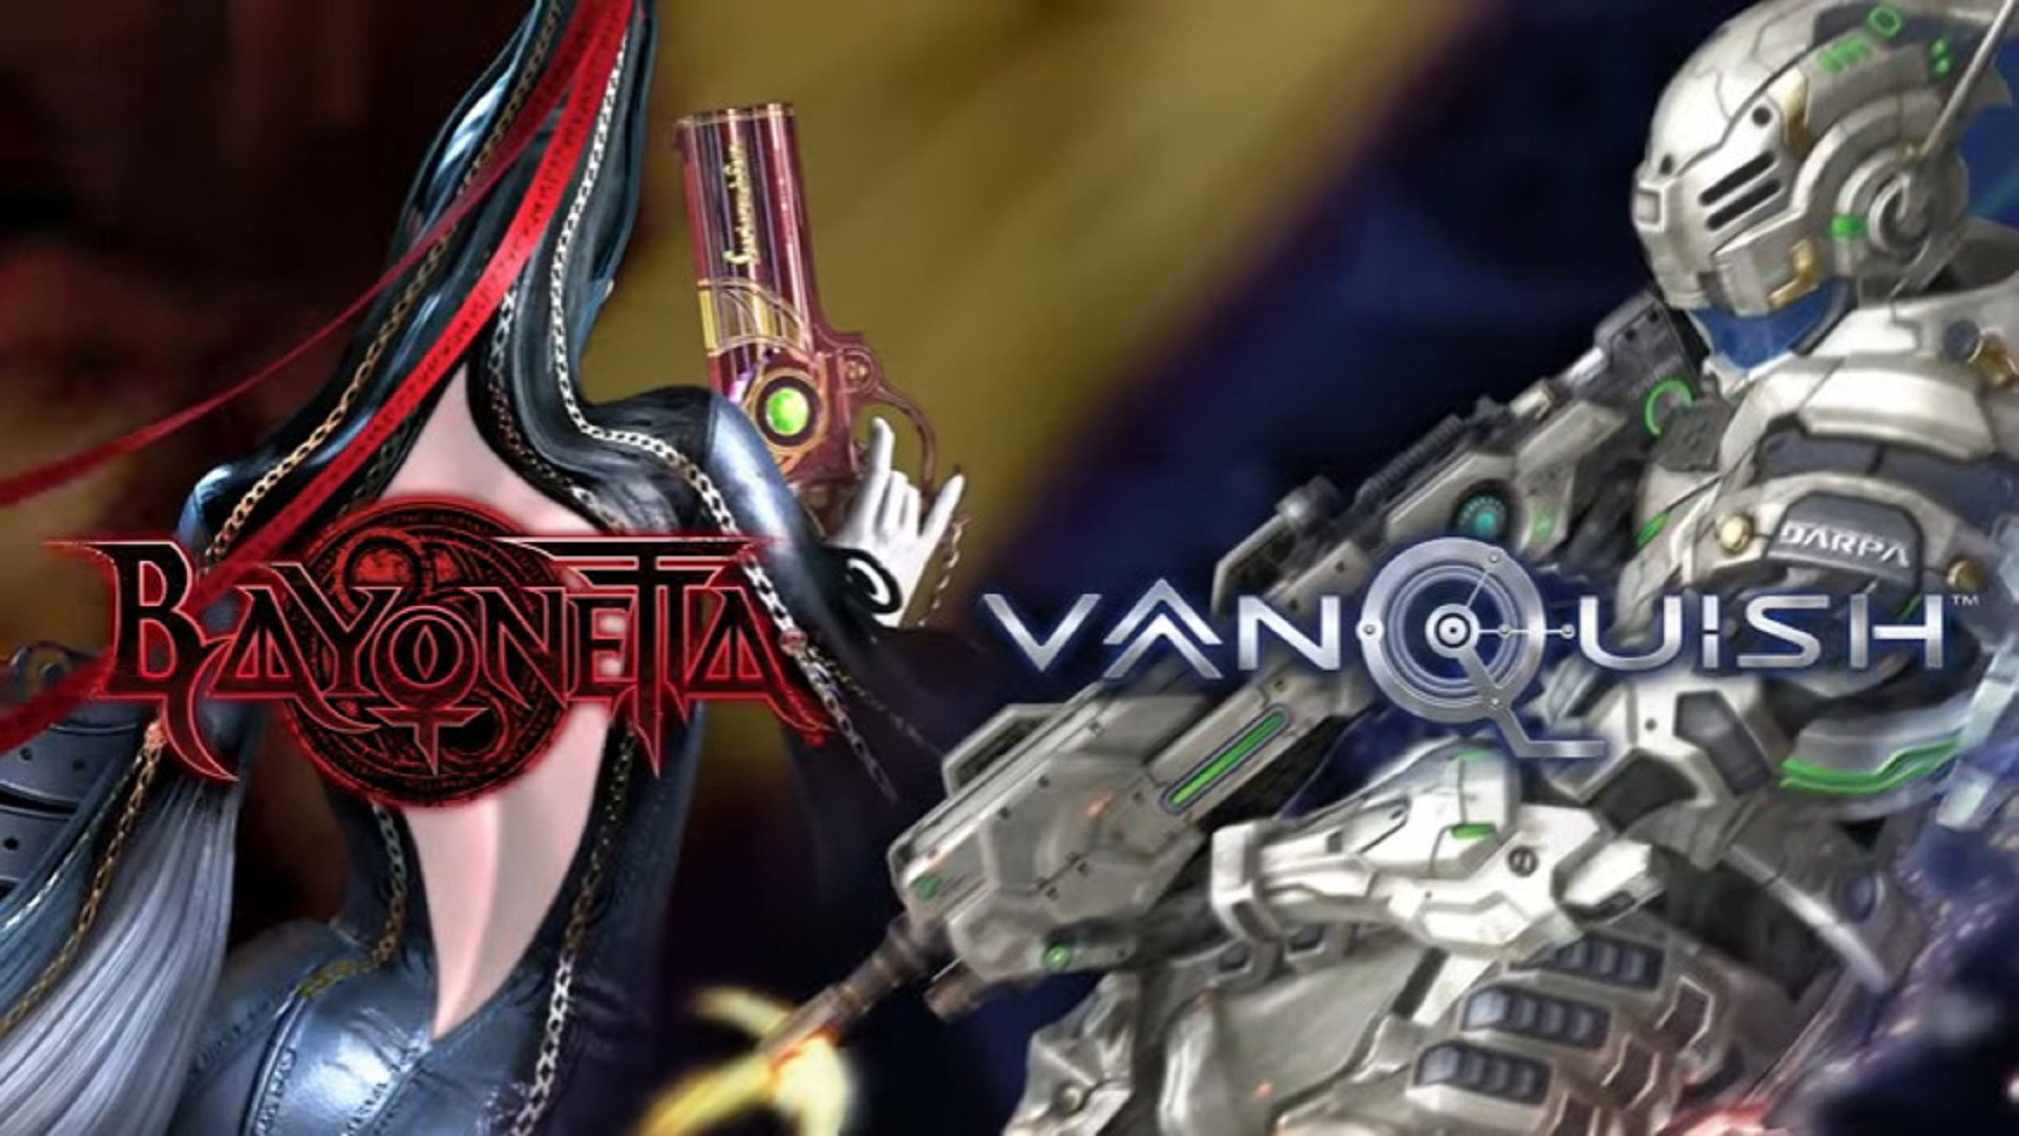 Recently, Bayonetta and Vanquish Celebrates Their 10th Anniversary With A New Redesign Of Steelbook